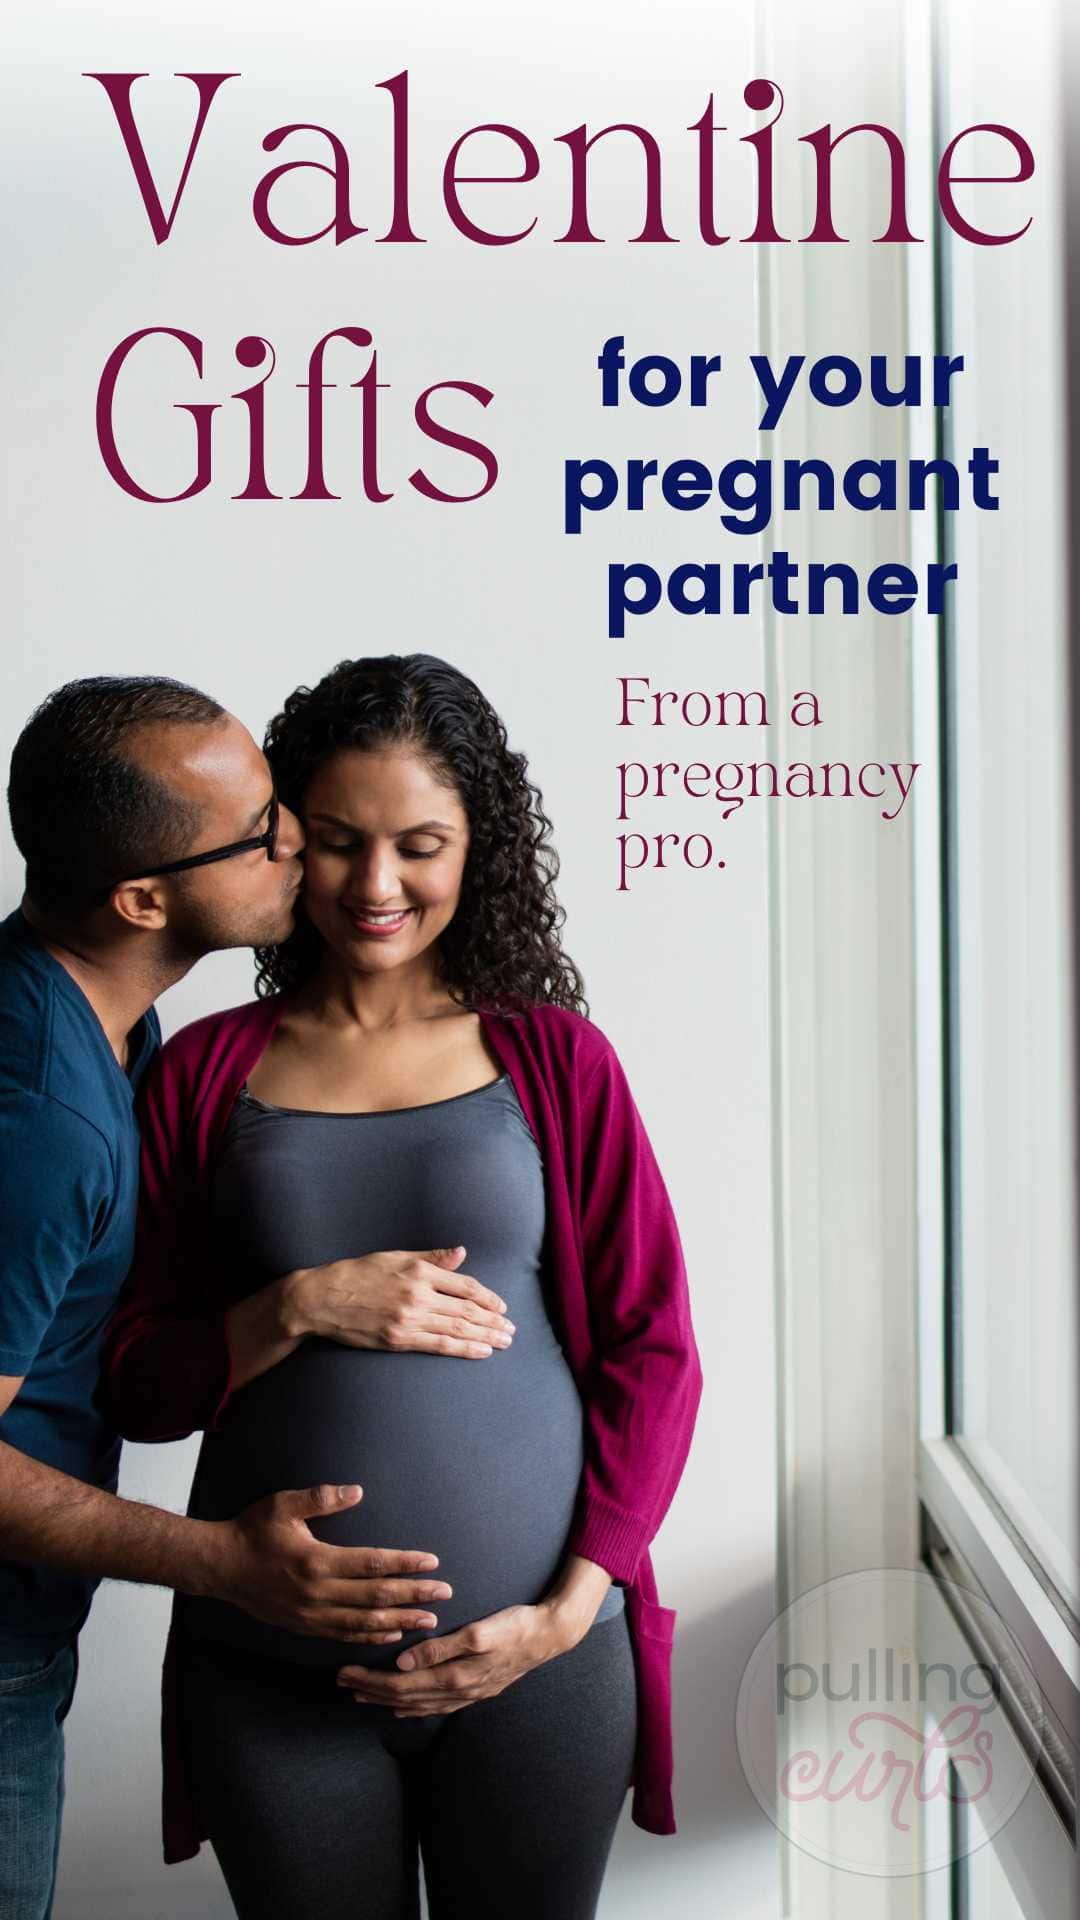 https://www.pullingcurls.com/wp-content/uploads/2023/01/valentines-gifts-for-pregnant-wife-1.jpg